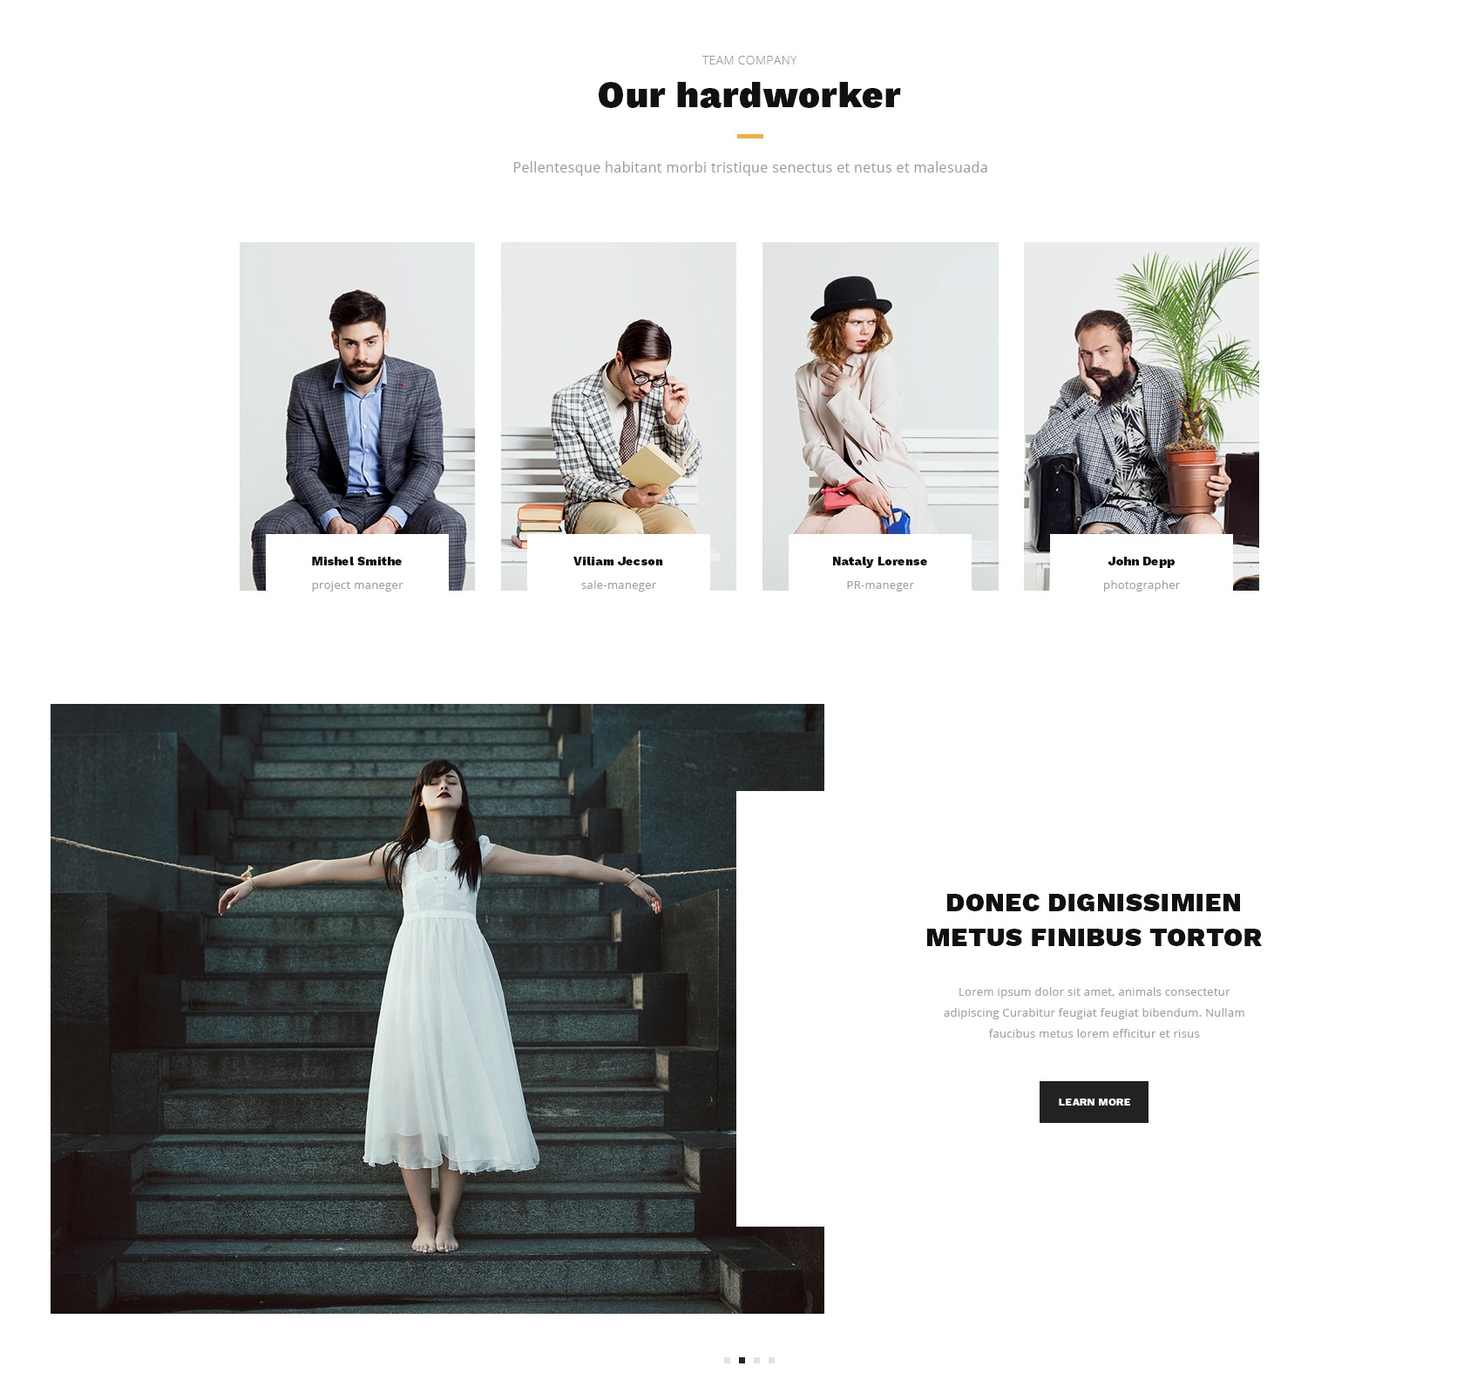 Mobile Bootstrap Gallery Theme